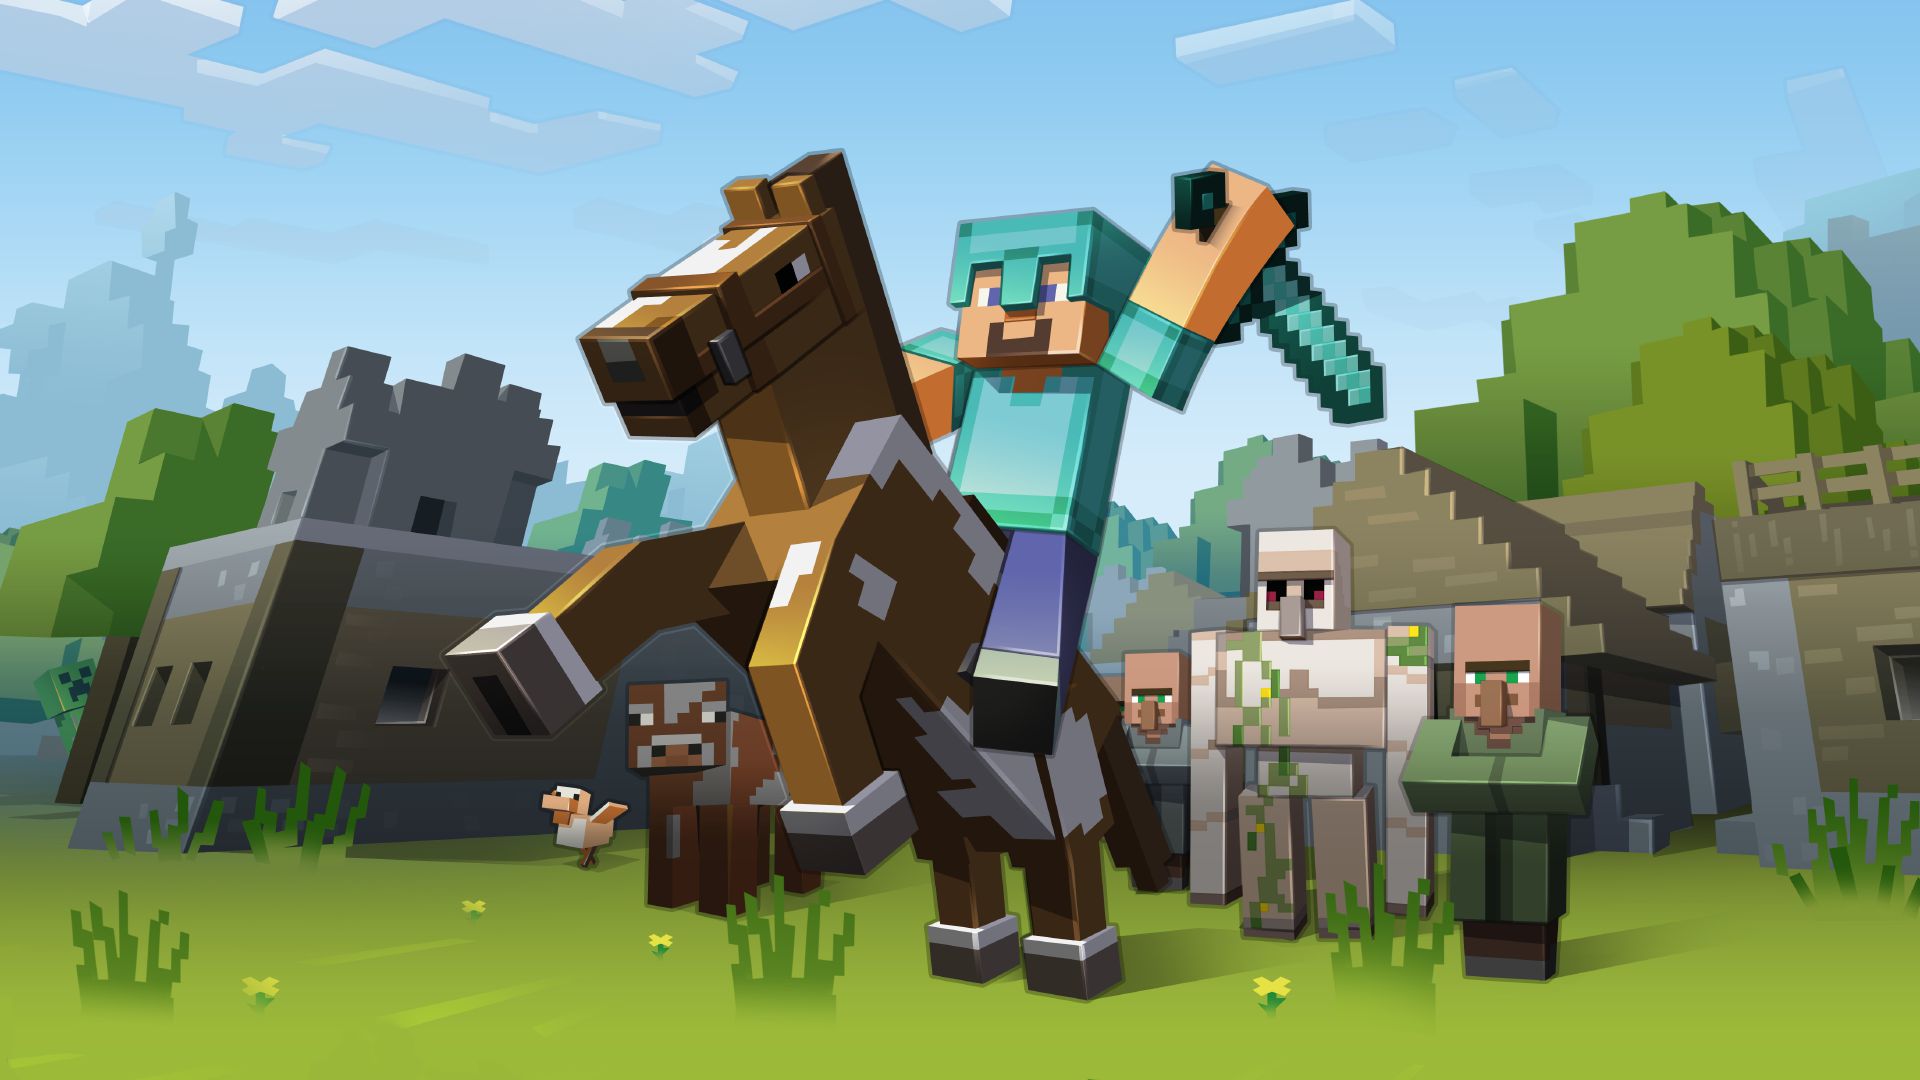 Minecraft will never incorporate NFTs, according to Mojang